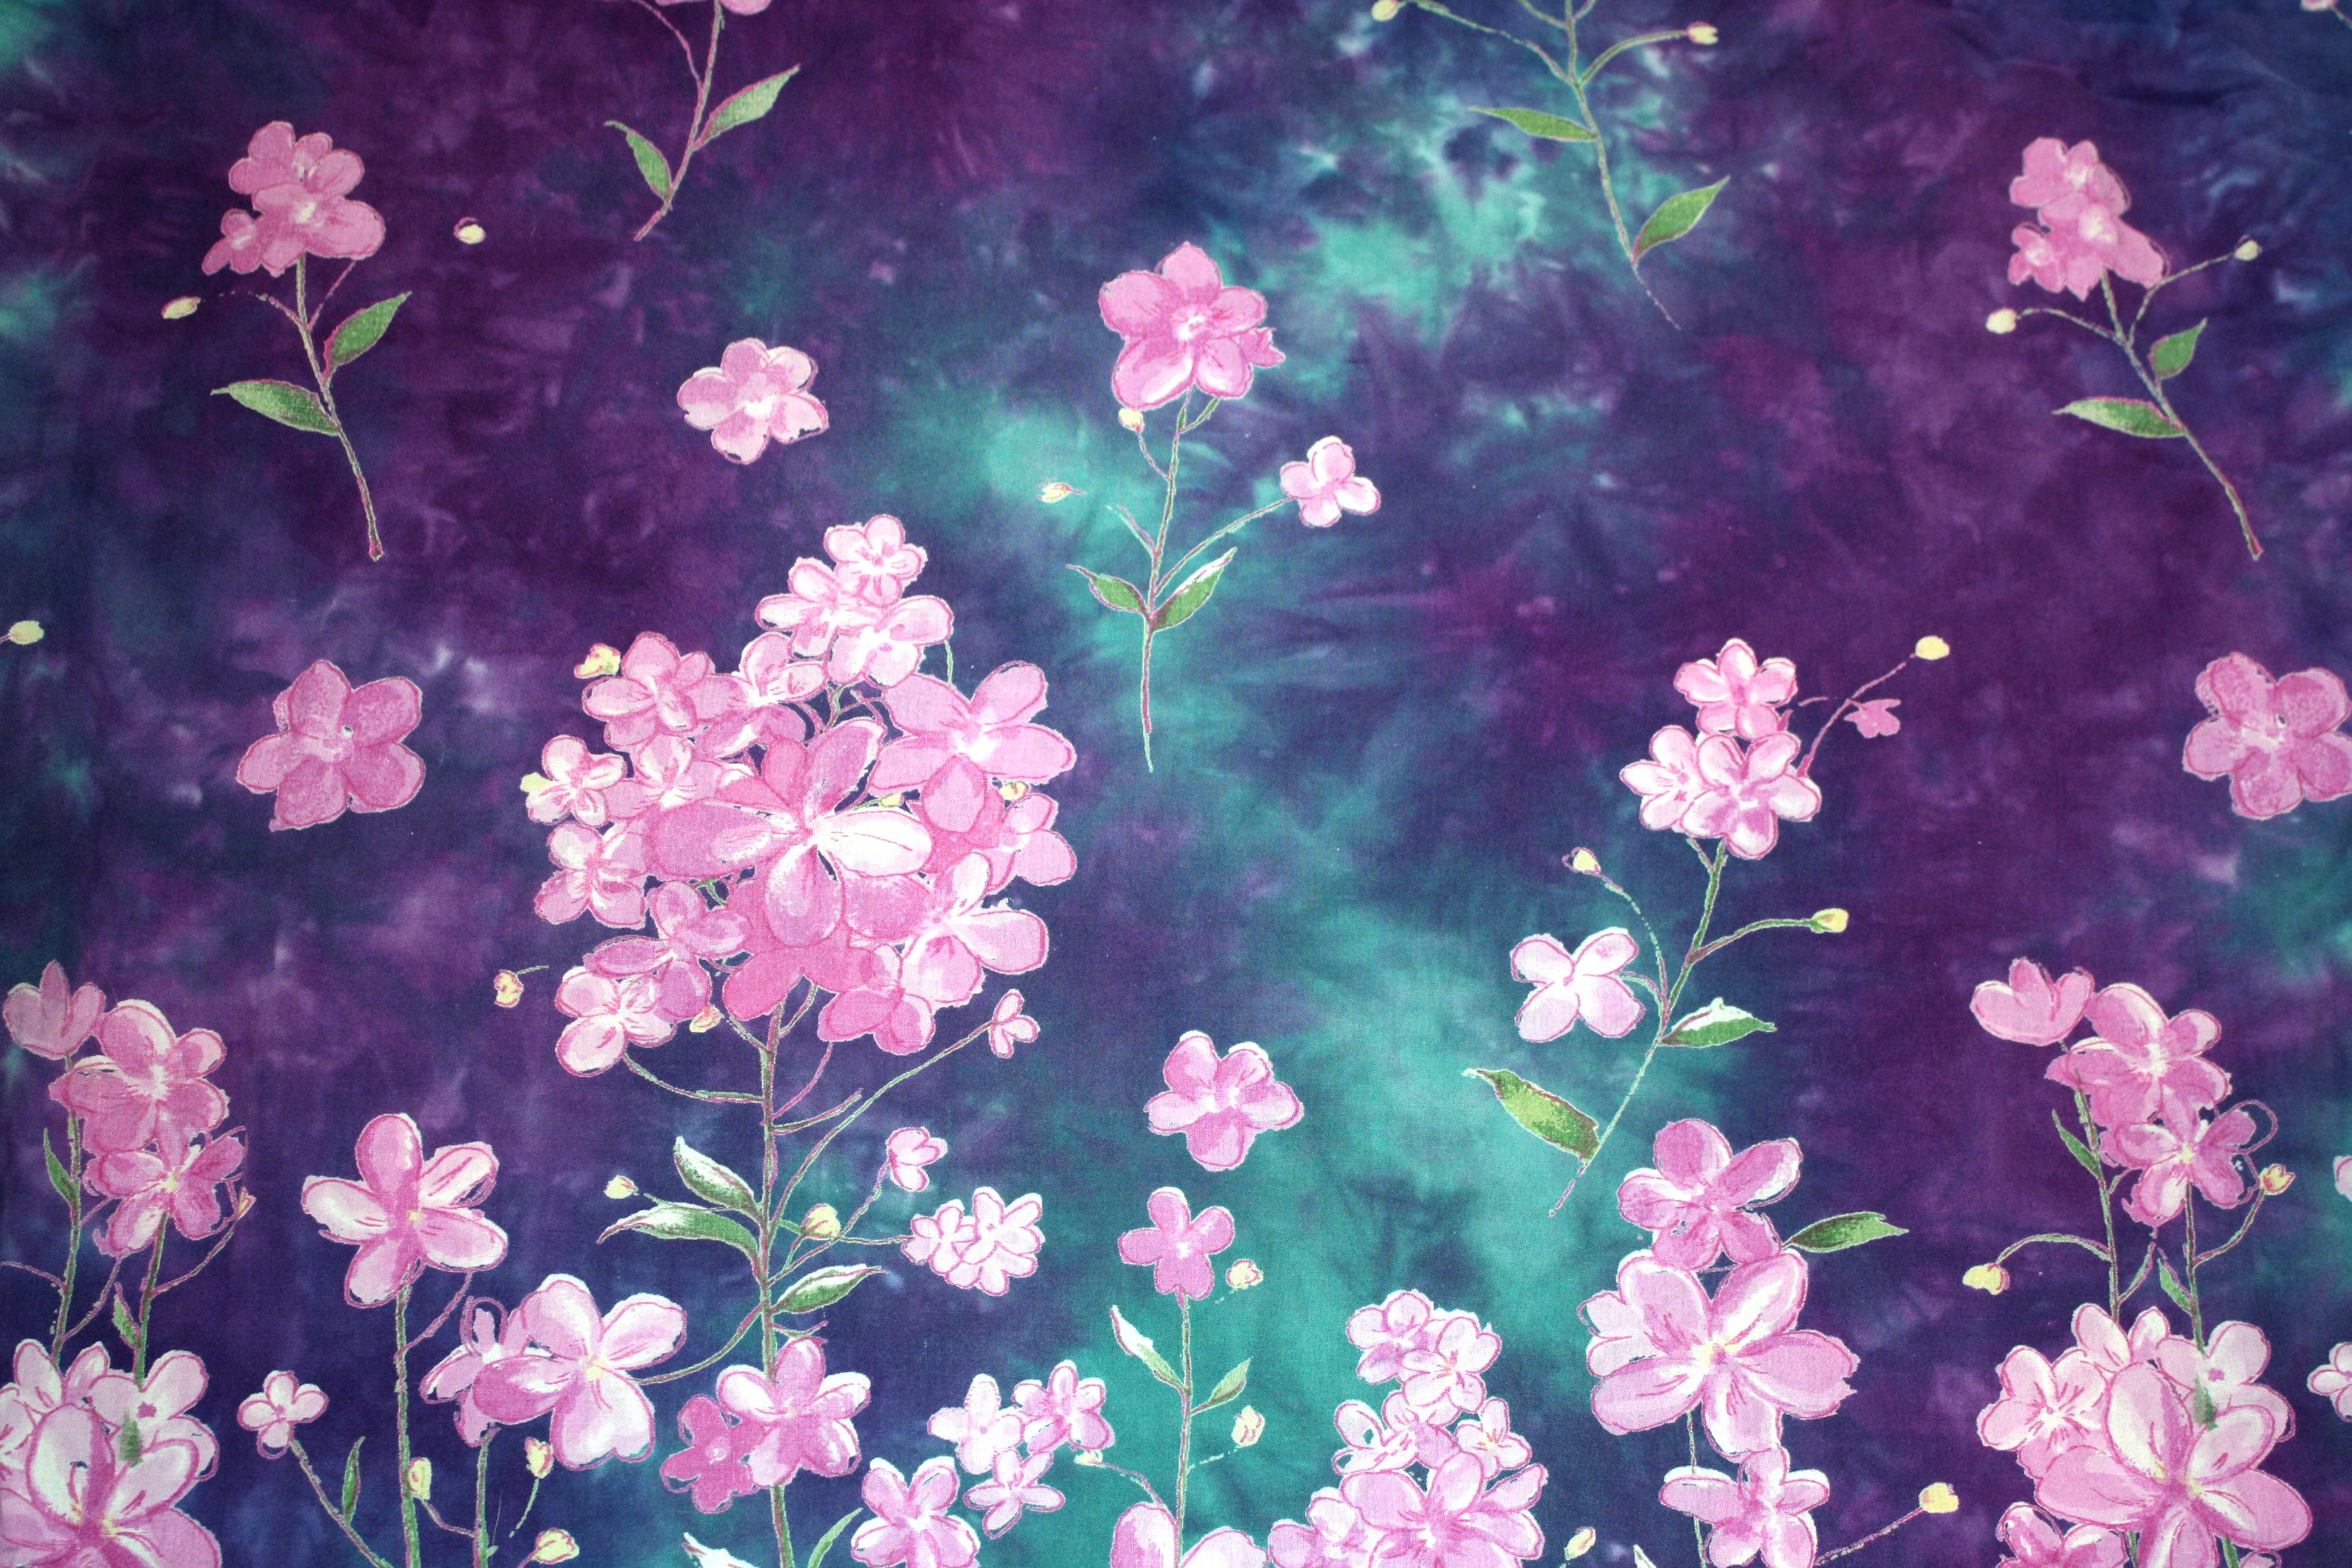 Purple and Green Batik Fabric Texture with Flowers Picture | Free